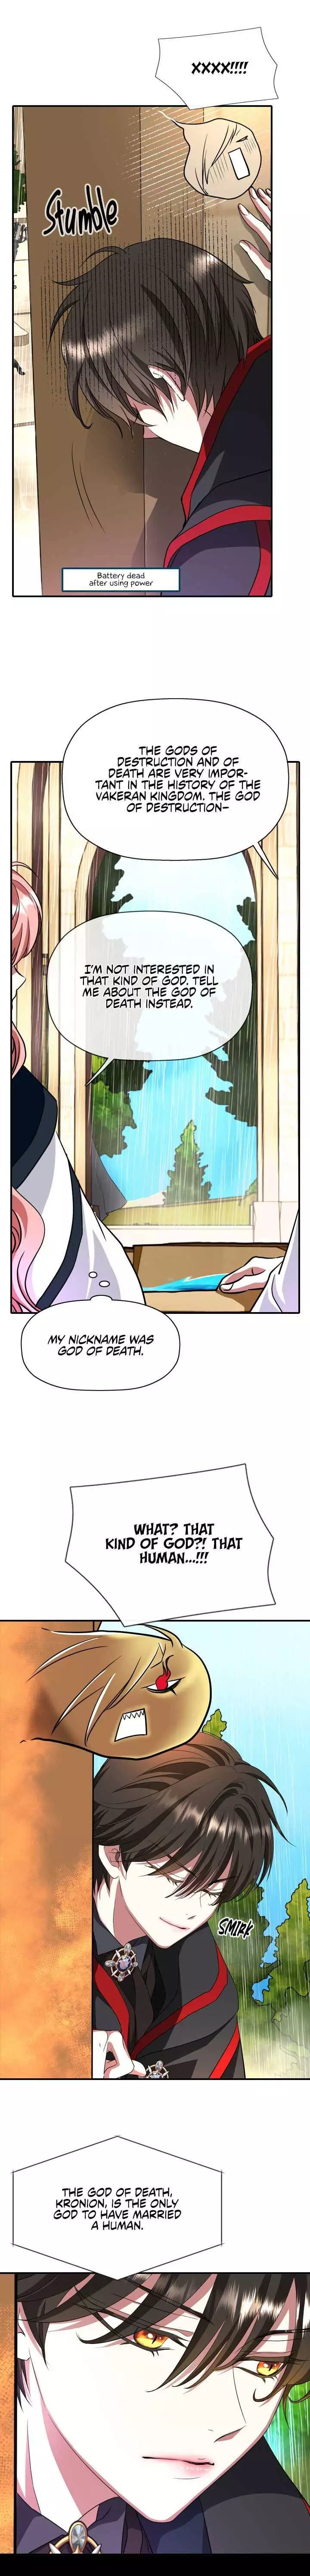 I’M A Killer But I’M Thinking Of Living As A Princess - 10 page 7